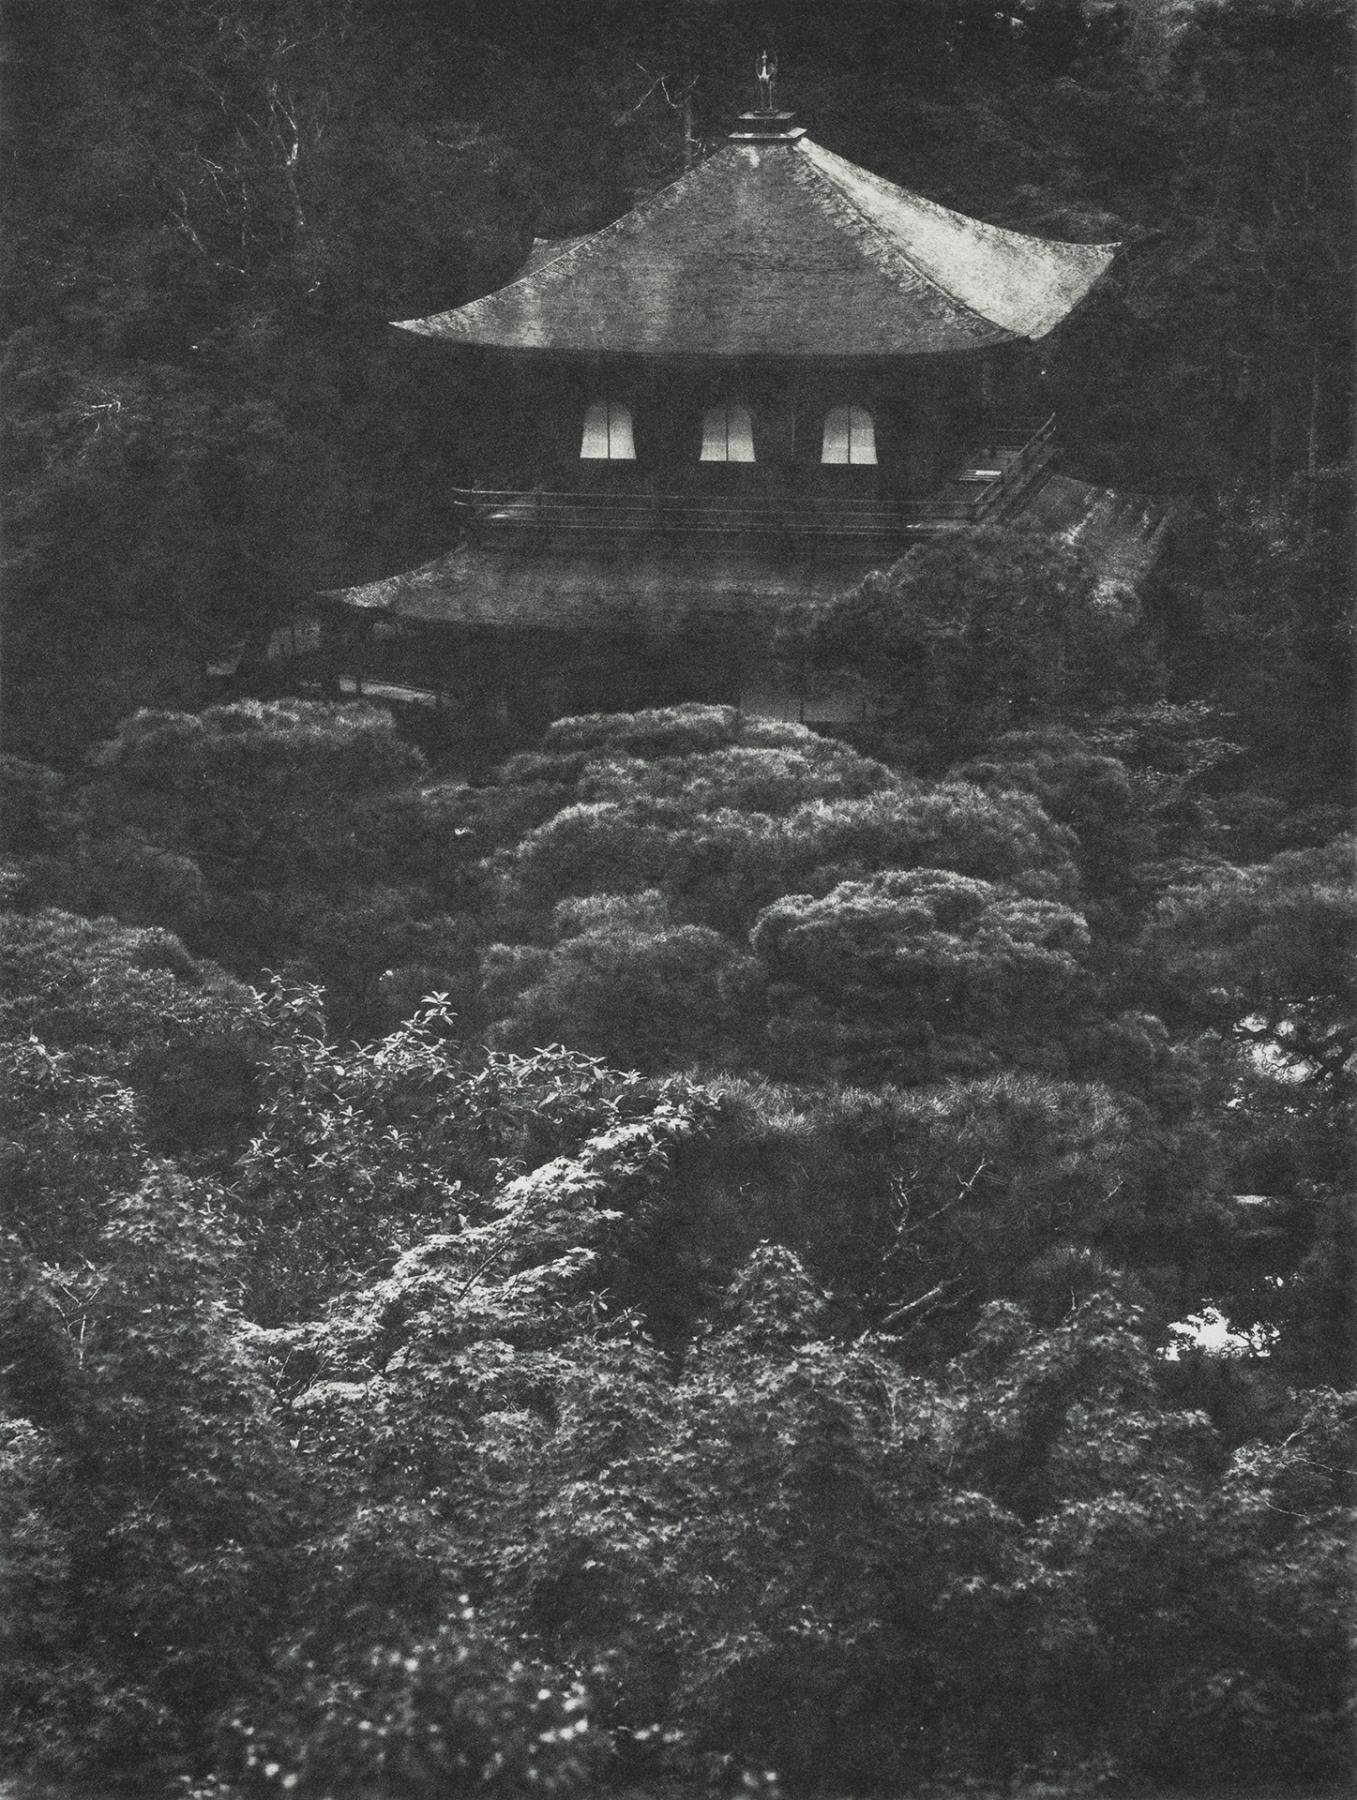 A photogravure print of Ginkakuji temple in Kyoto.